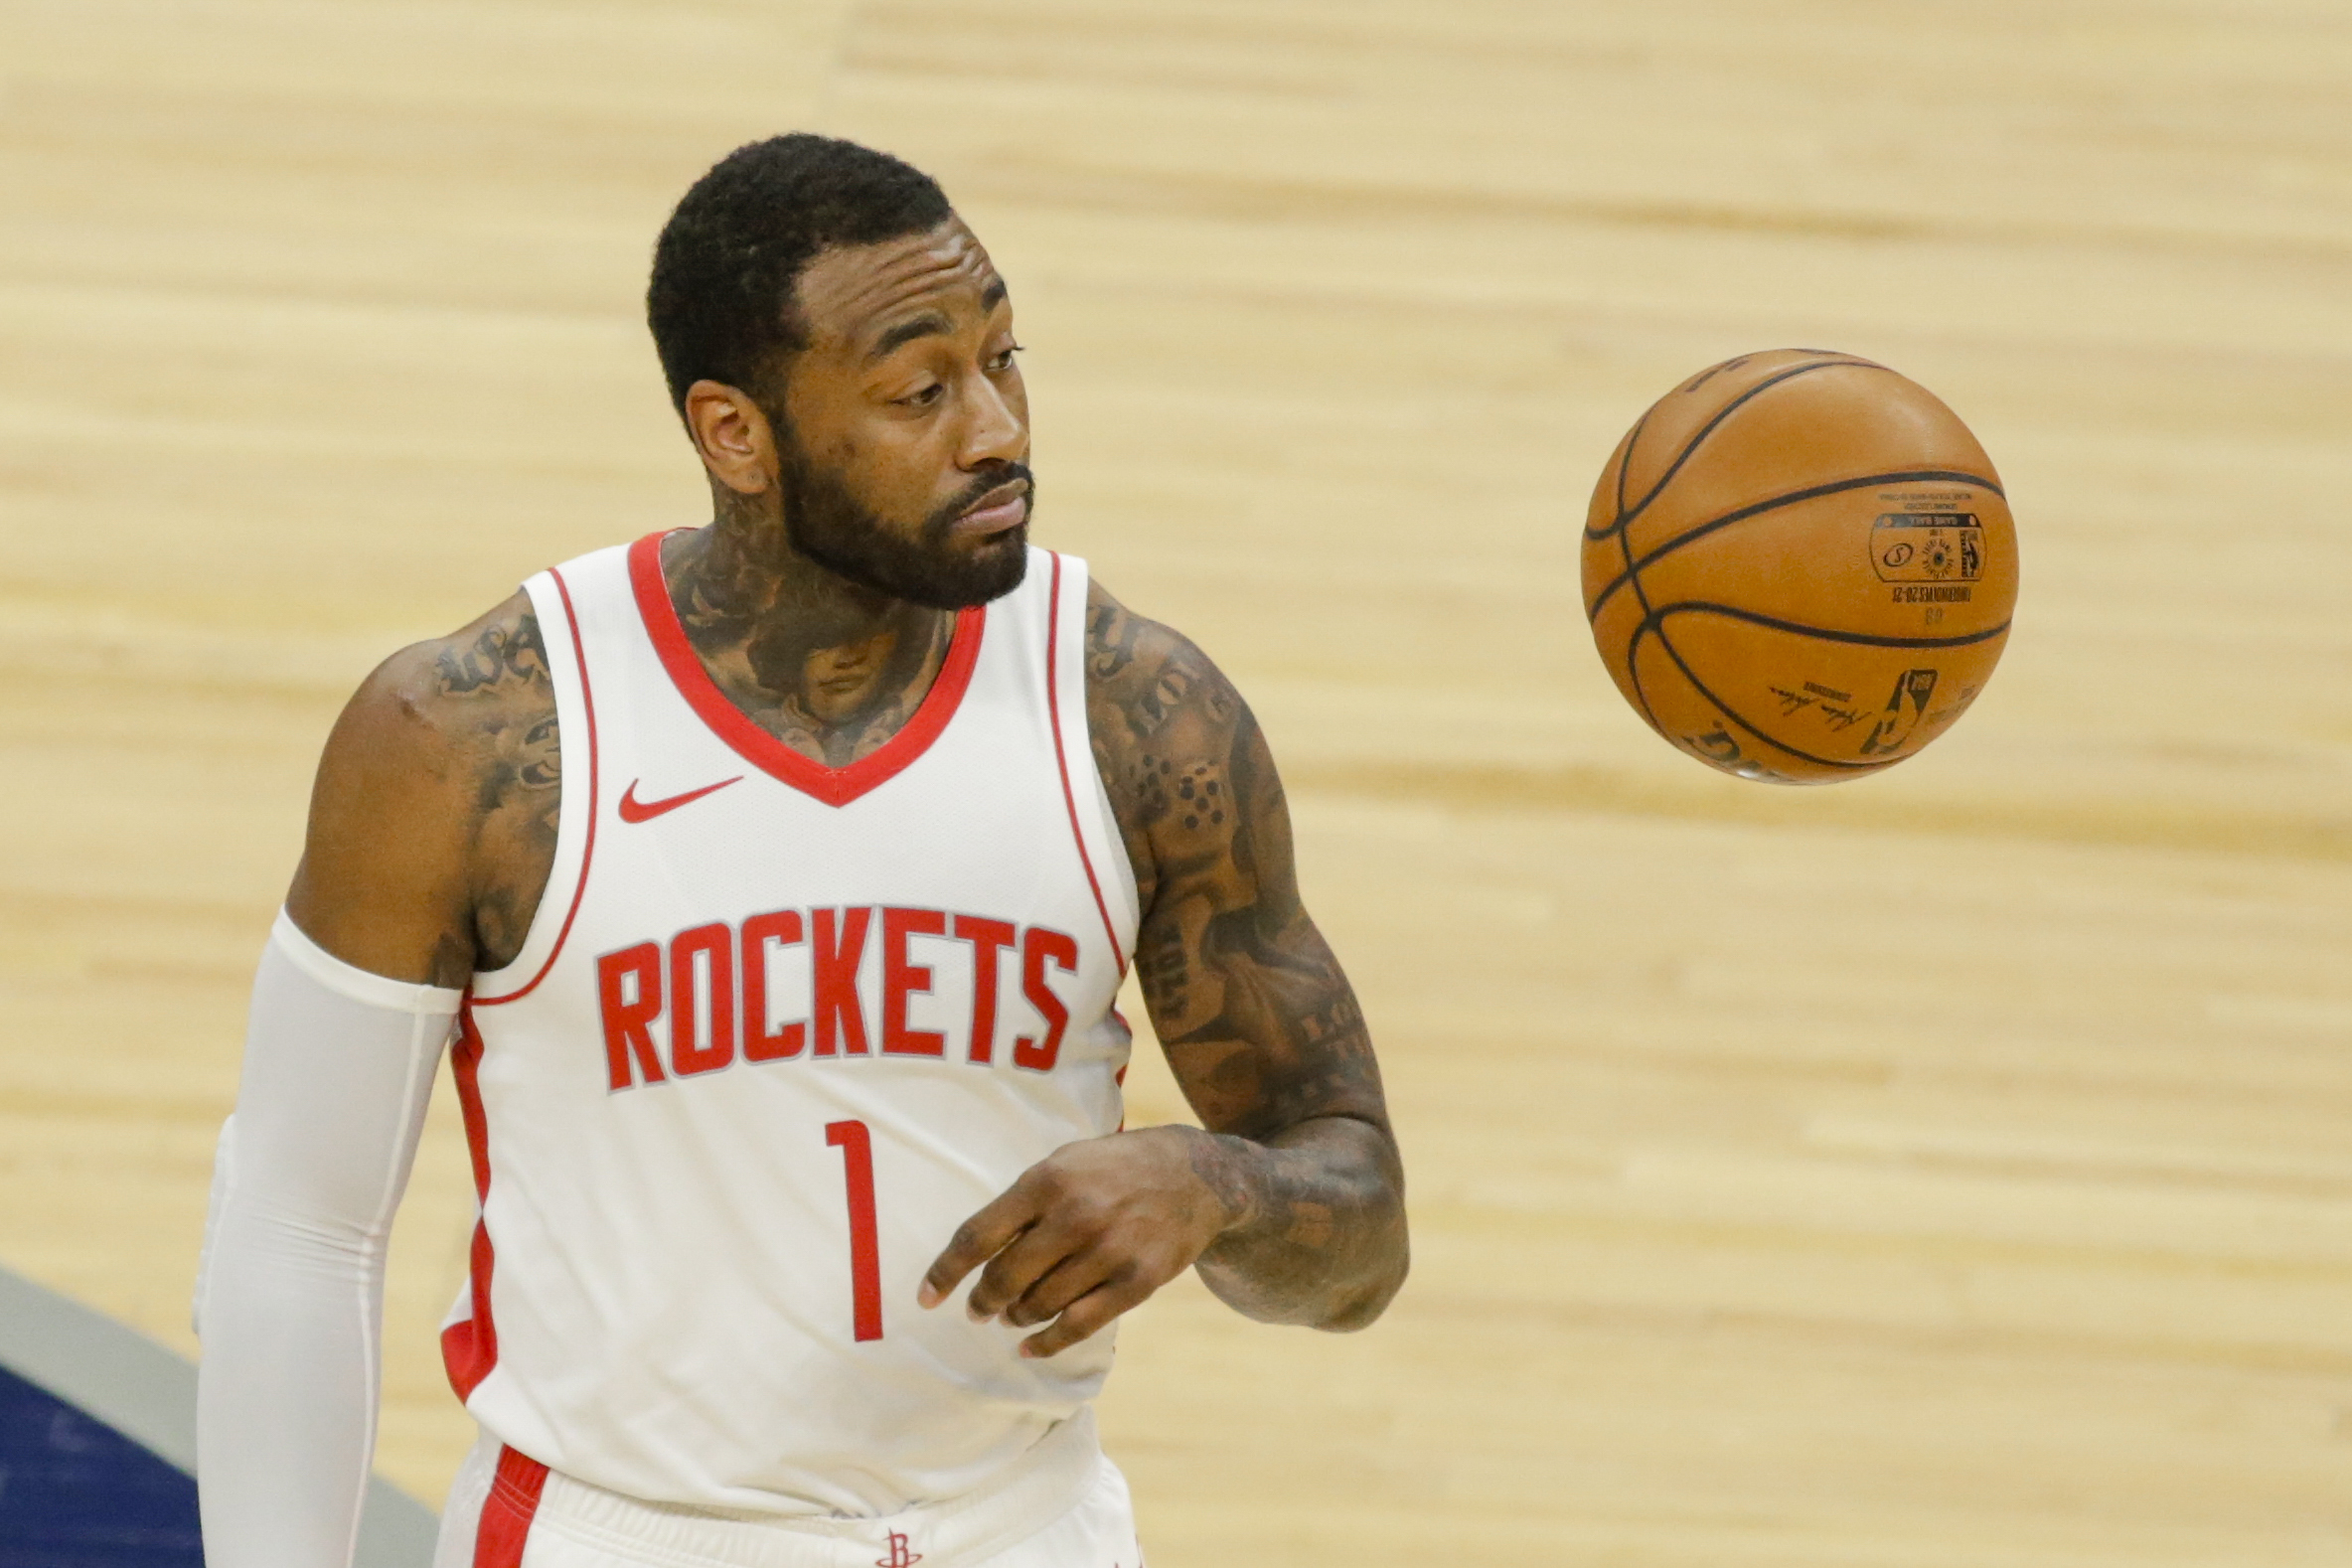 John wall appreciation??? just agreed to find a new home. : r/rockets